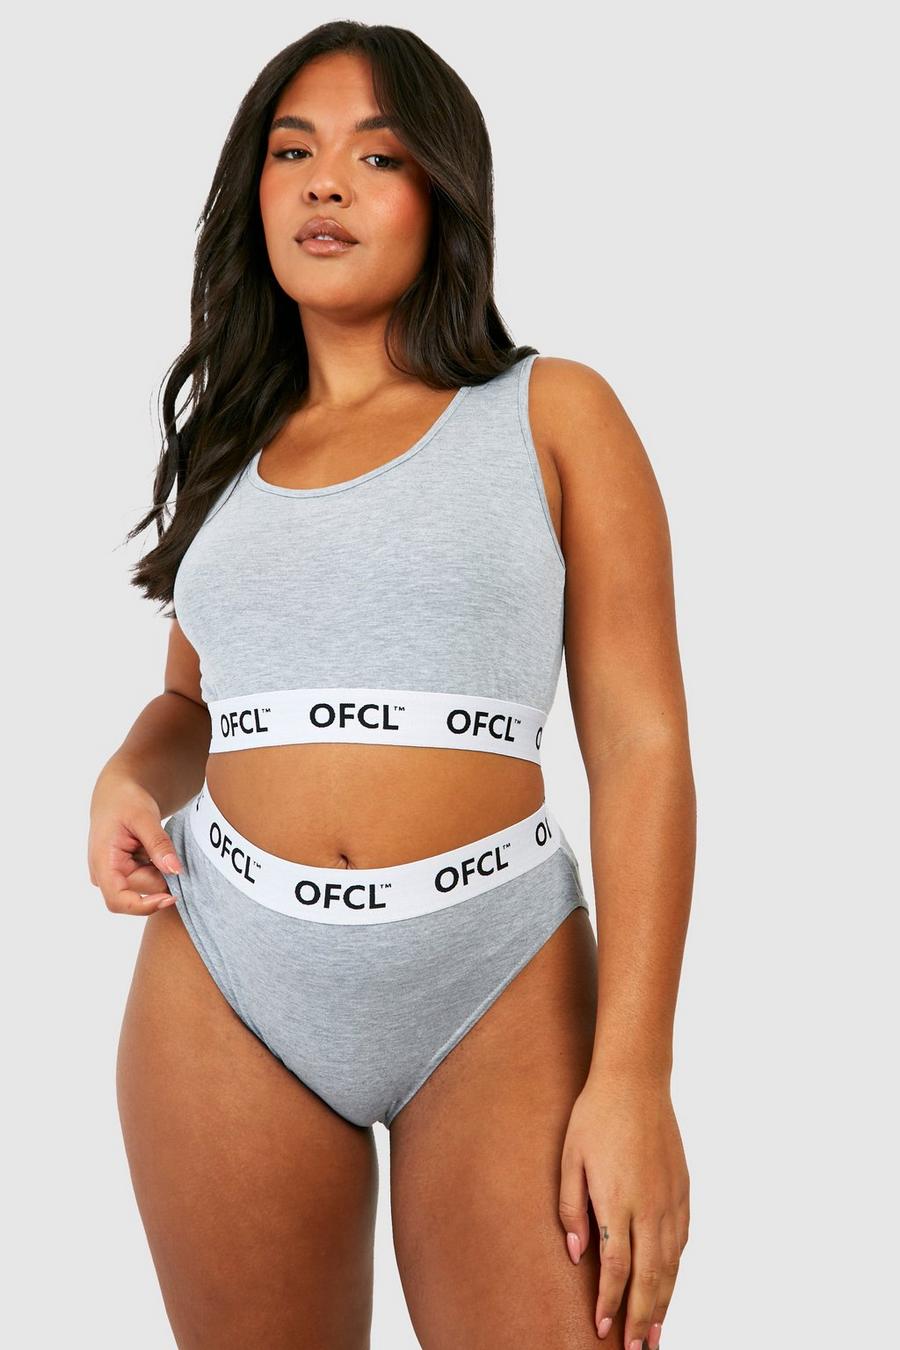 Comfortable Stylish plus size bra and panties sets Deals 